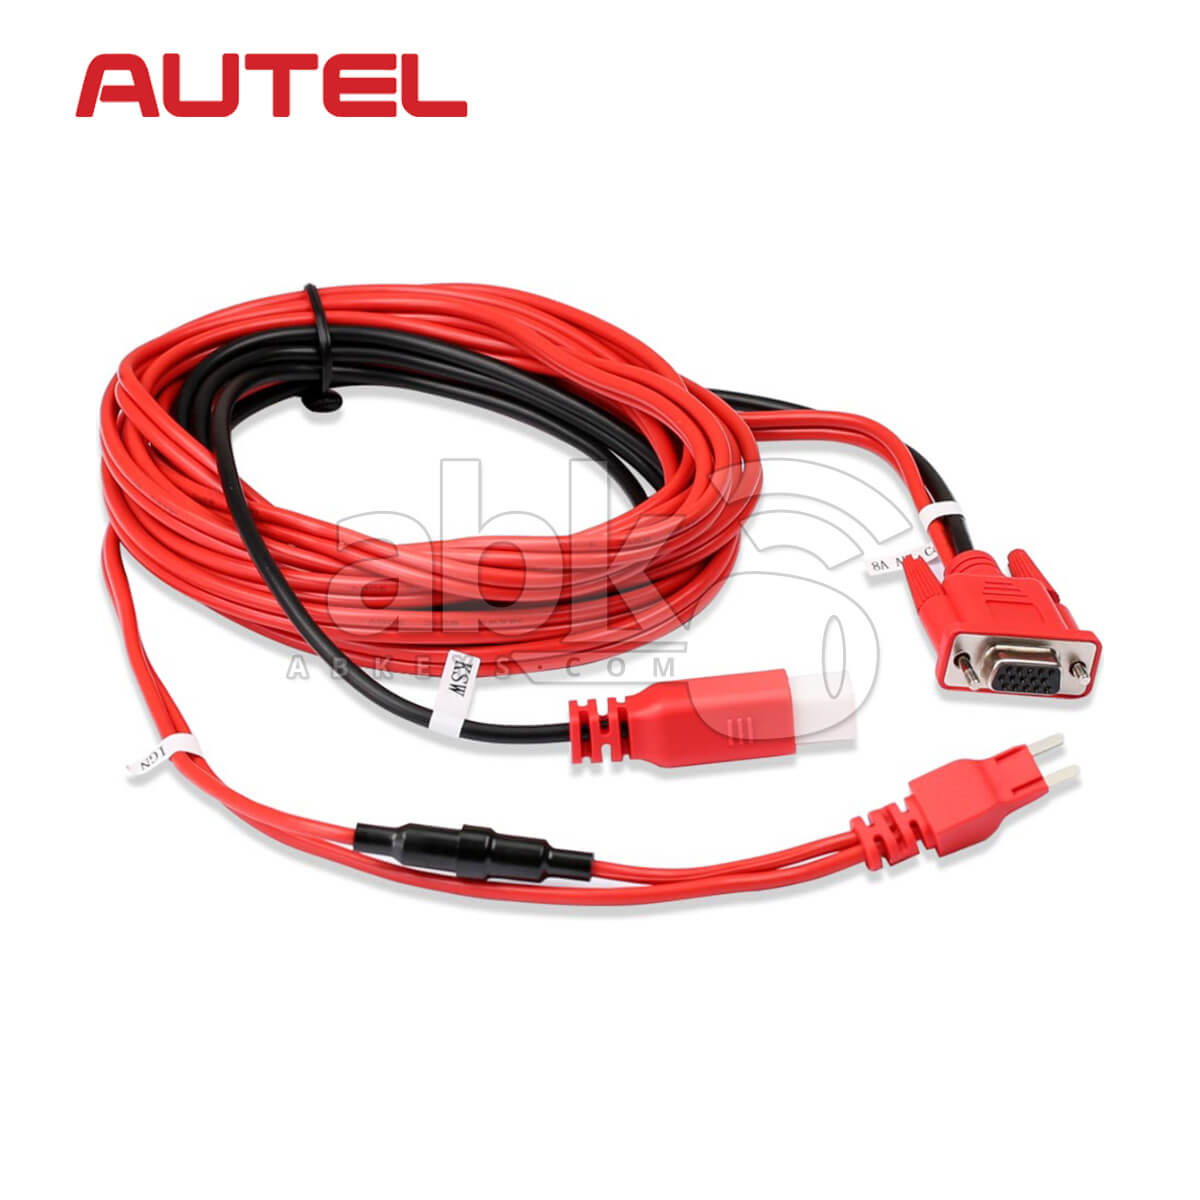 Autel Toyota 8A Cable For Toyota All Keys Lost AKL Kit - ABK-1388 - ABKEYS.COM